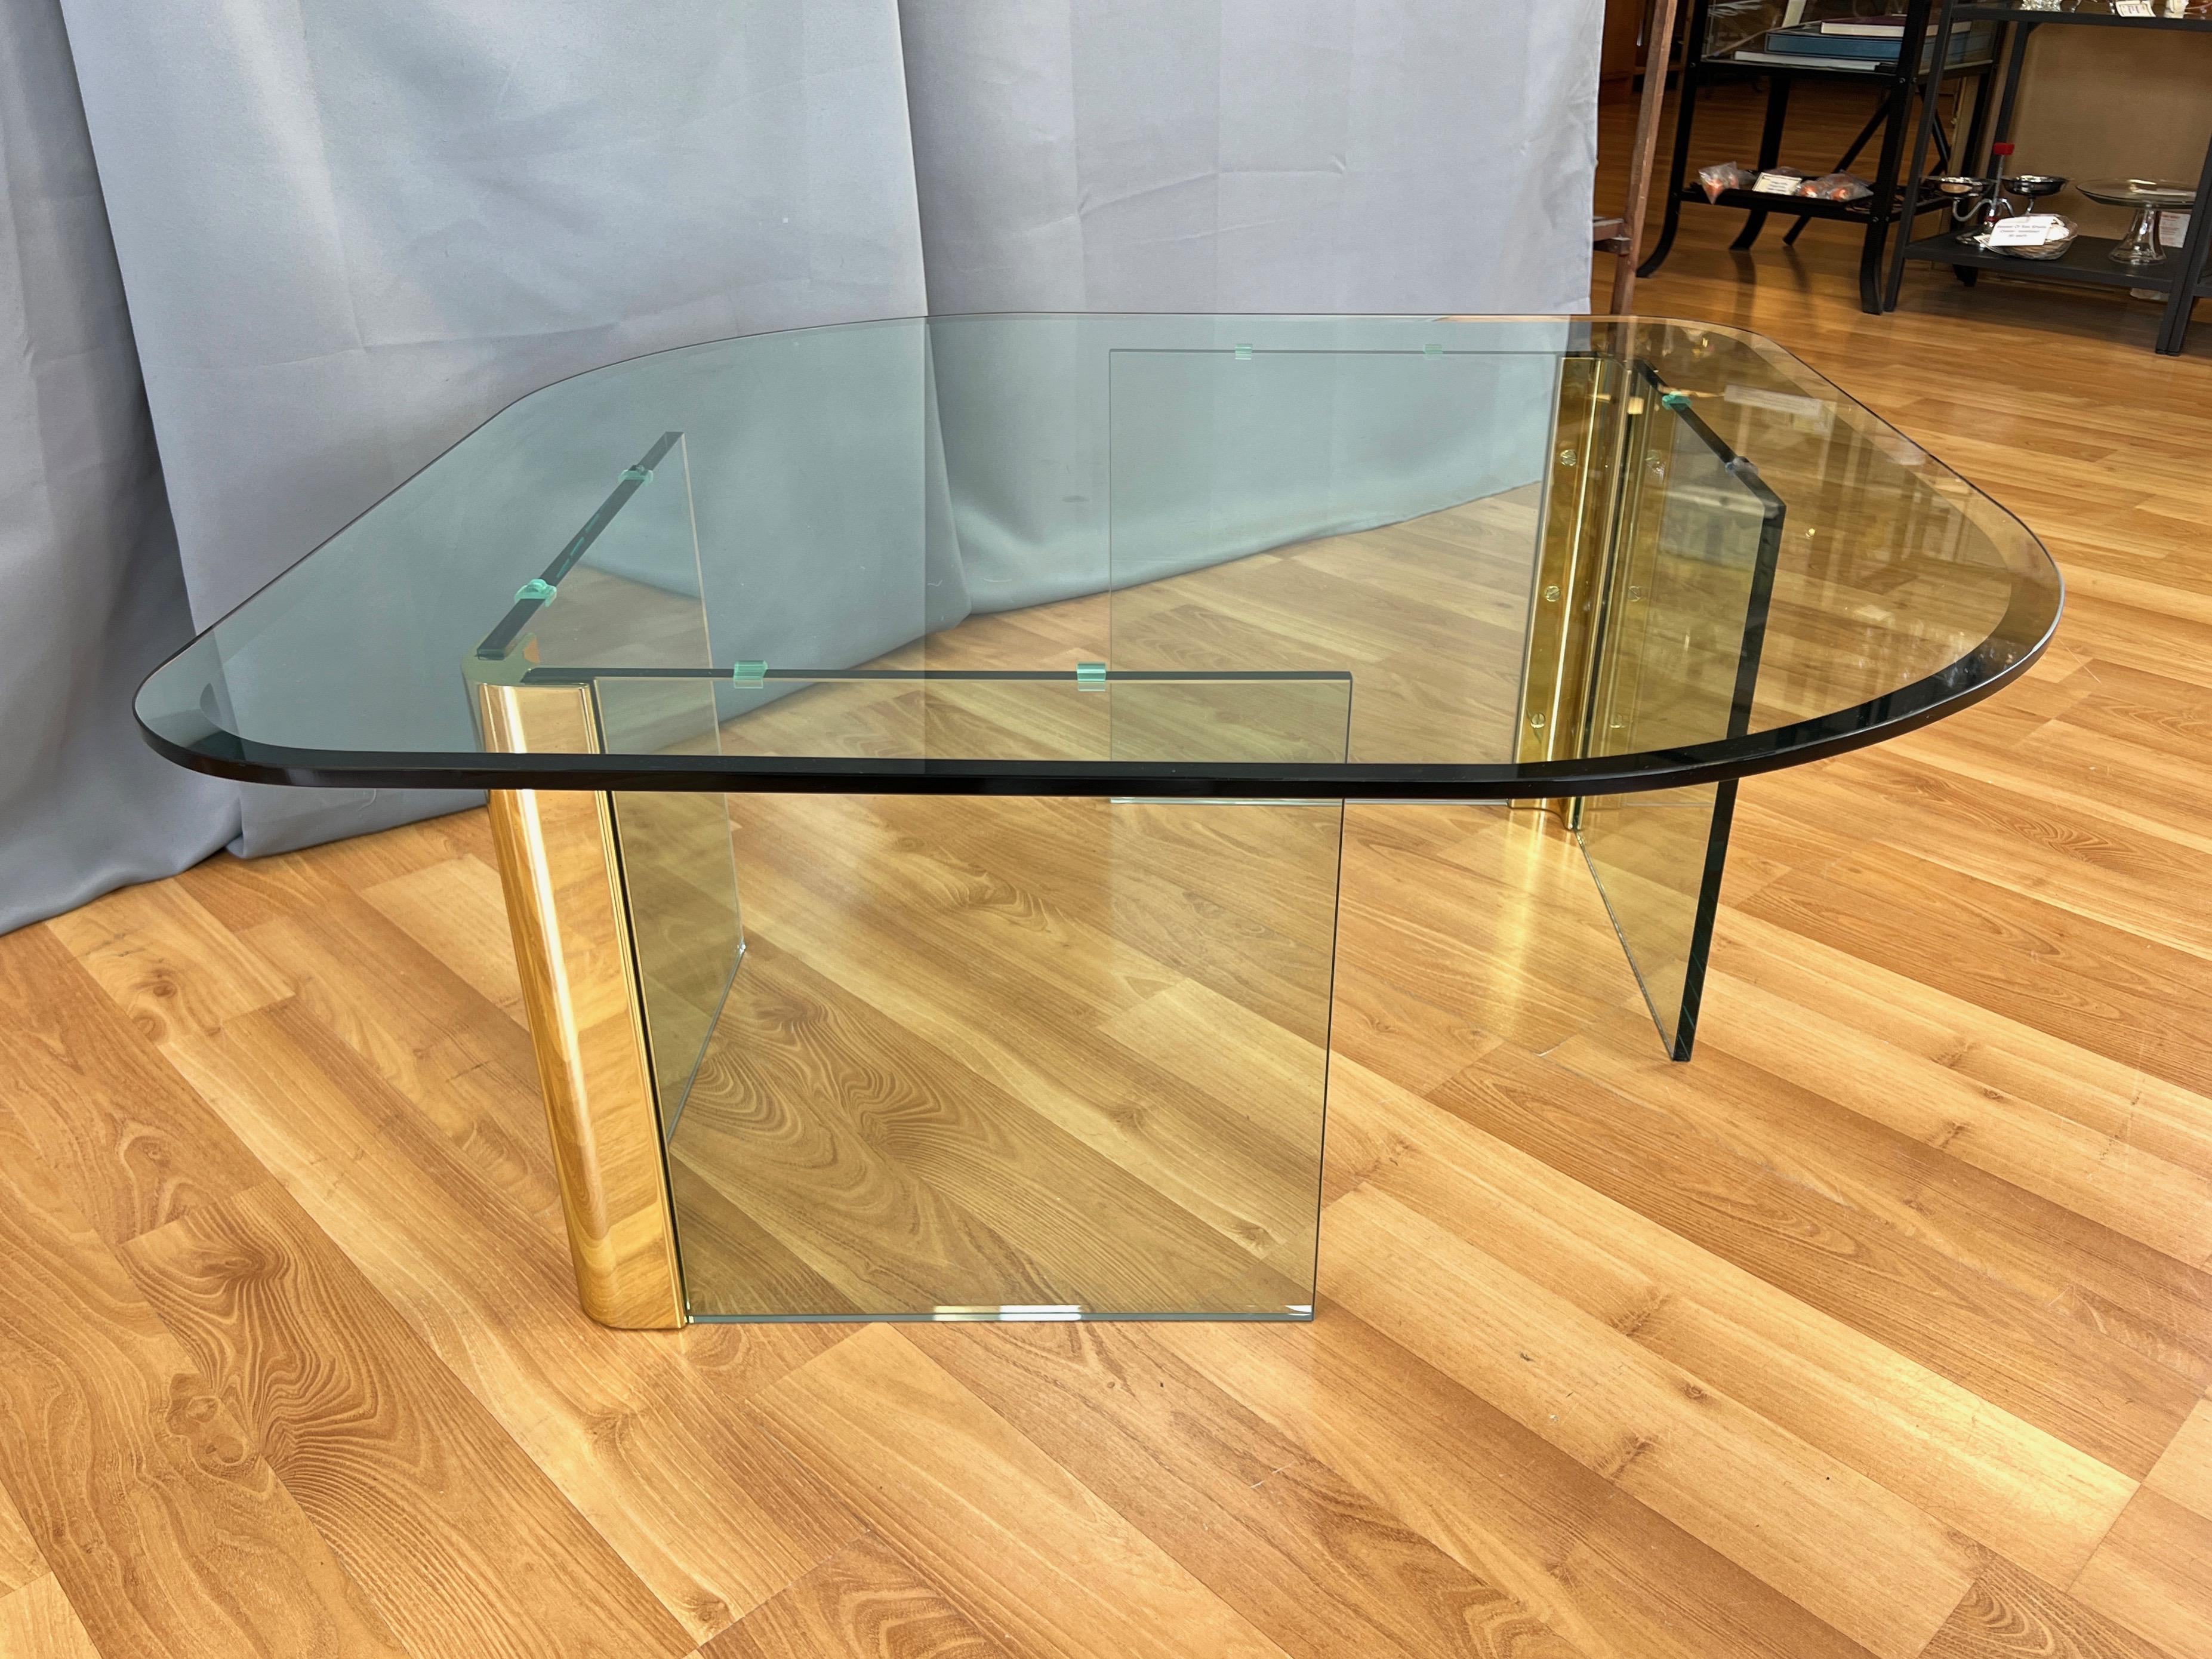 A 1970s glass-top coffee table with brass and glass base by Leon Rosen for The Pace Collection.

Sleek minimalist design with a modernized Hollywood Regency vibe. Base comprised of two free-standing V-shaped elements, each with a gleaming brass